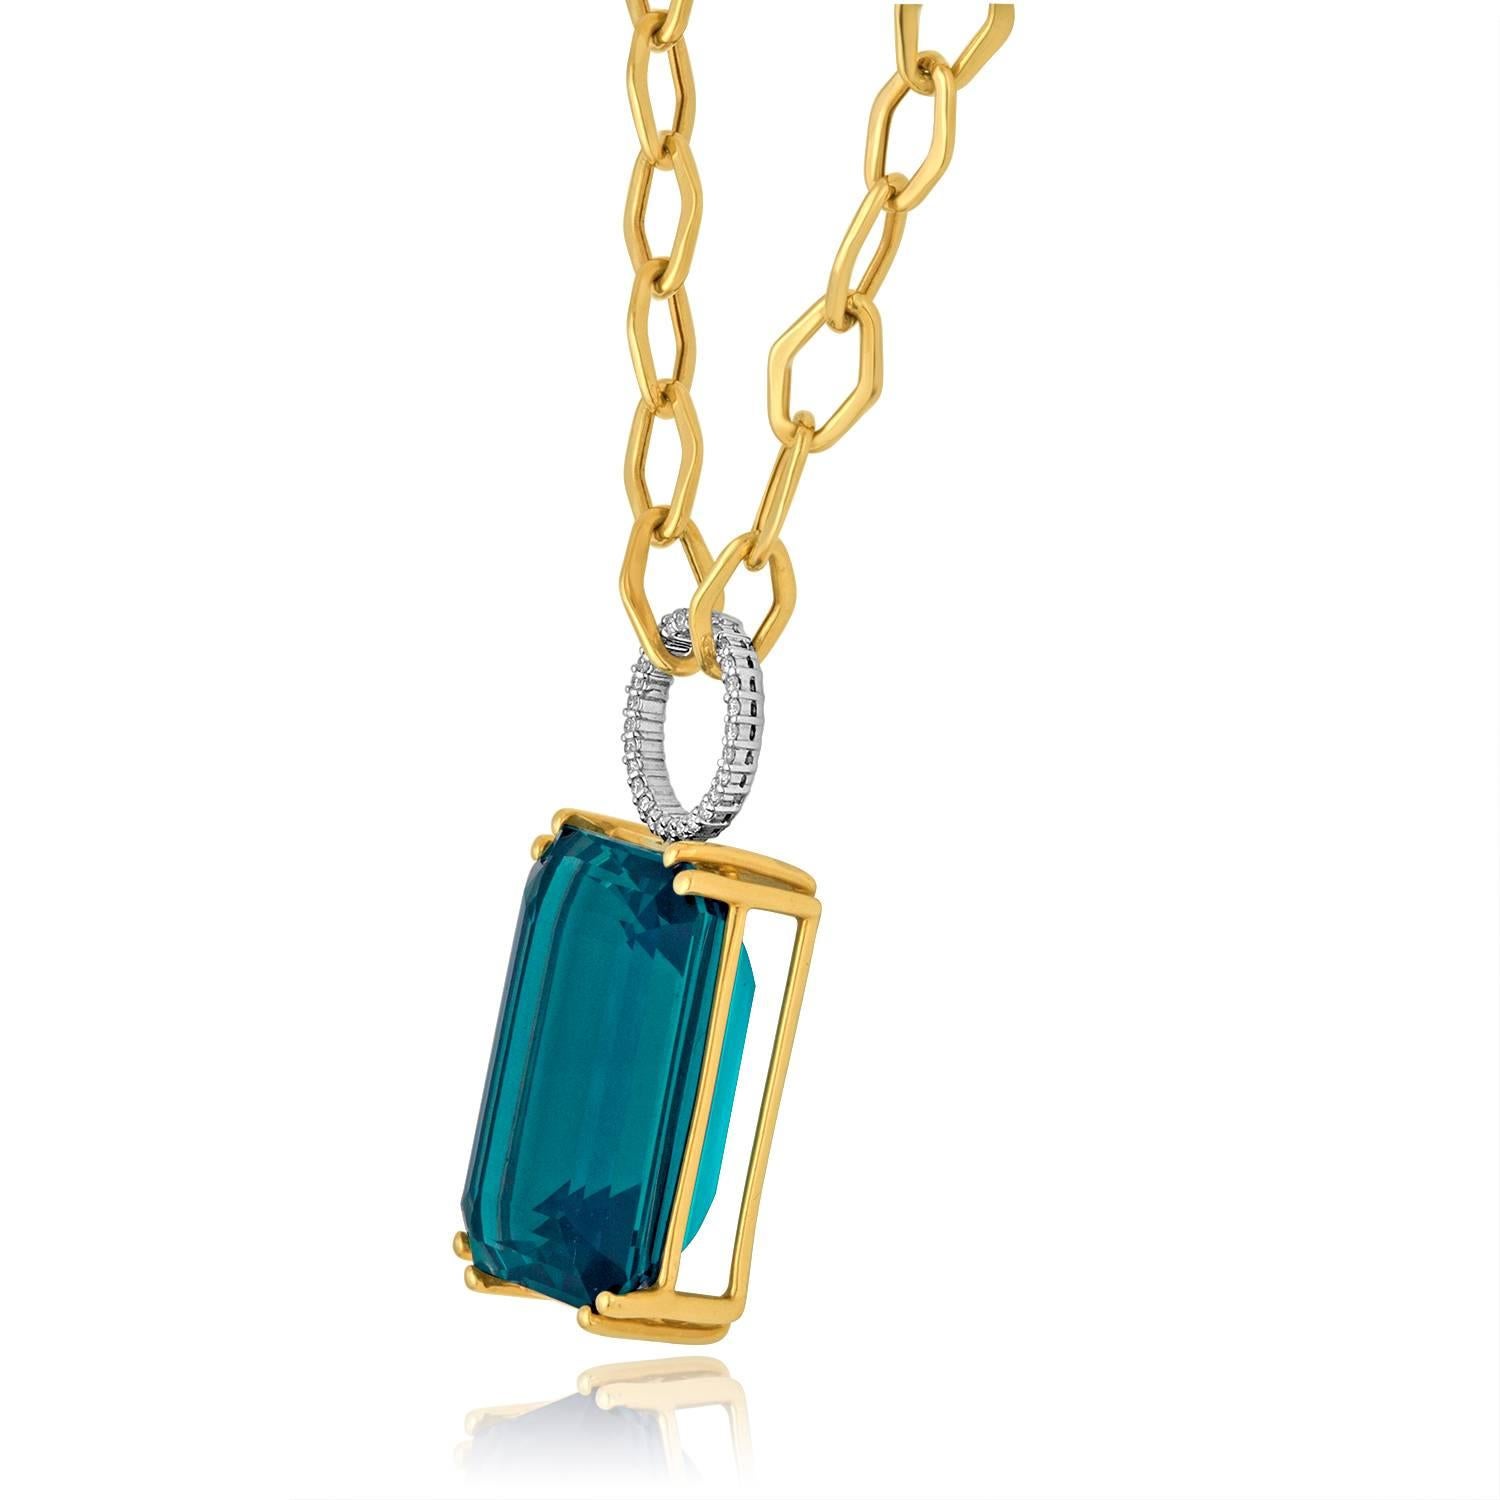 Very Large Blue Topaz Necklace
The necklace is 14K Yellow Gold
The Blue Topaz is 30.00 Carats
There are 0.20 Carats in Diamonds H/I SI
The necklace is 18